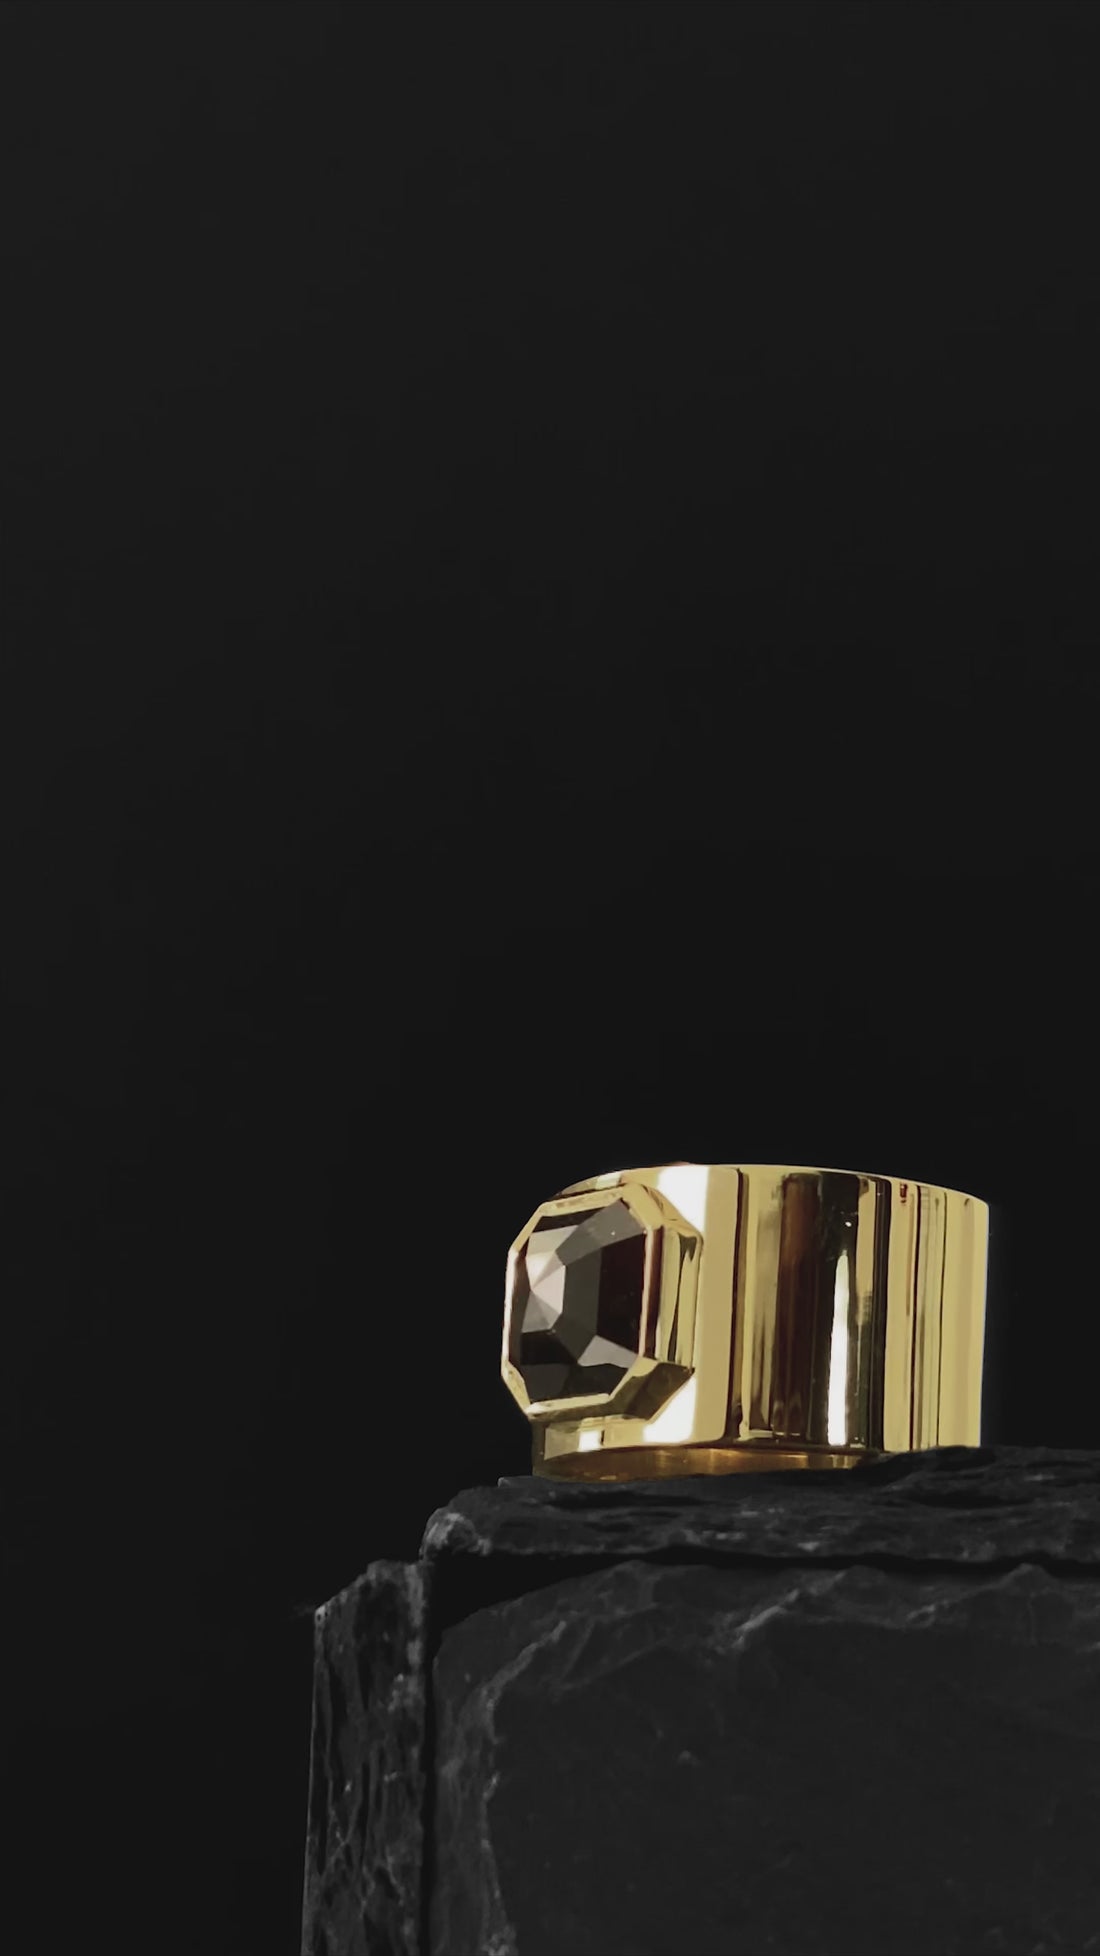 ILA SODHANI Aubergine Black Ring with a cushion cut black spinel stone set into a wide yellow gold band; shown on black stone in front of a black background with light moving across the ring.